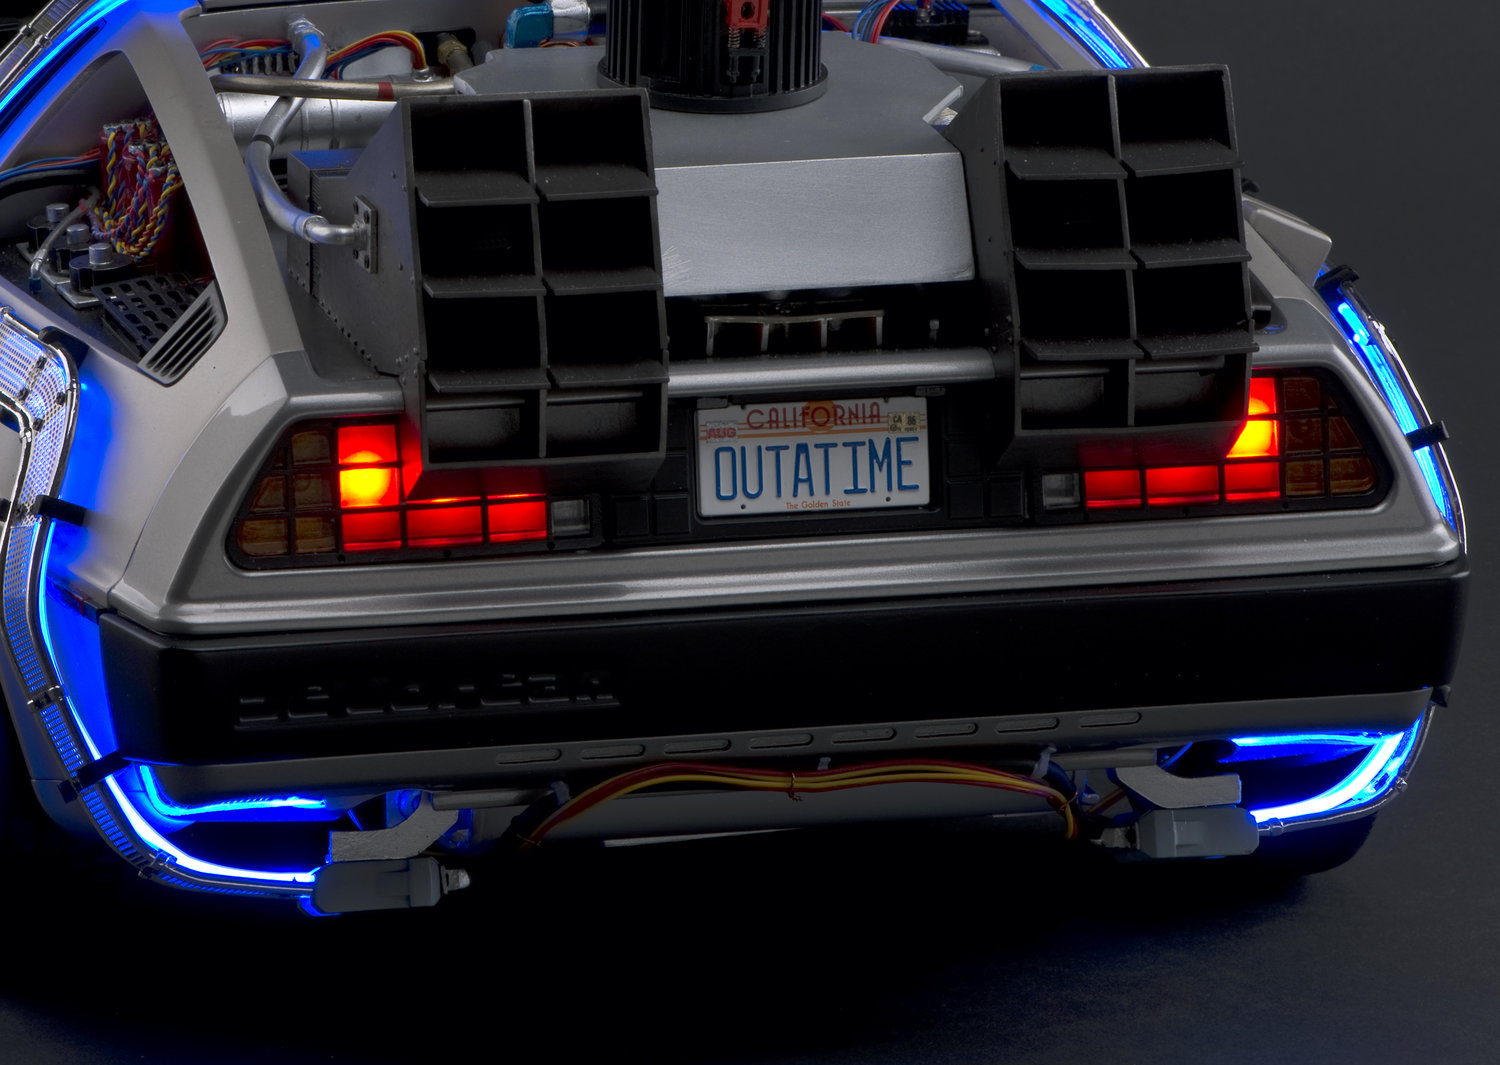 The back of a DeLorean DMC-12 from Back to the Future.